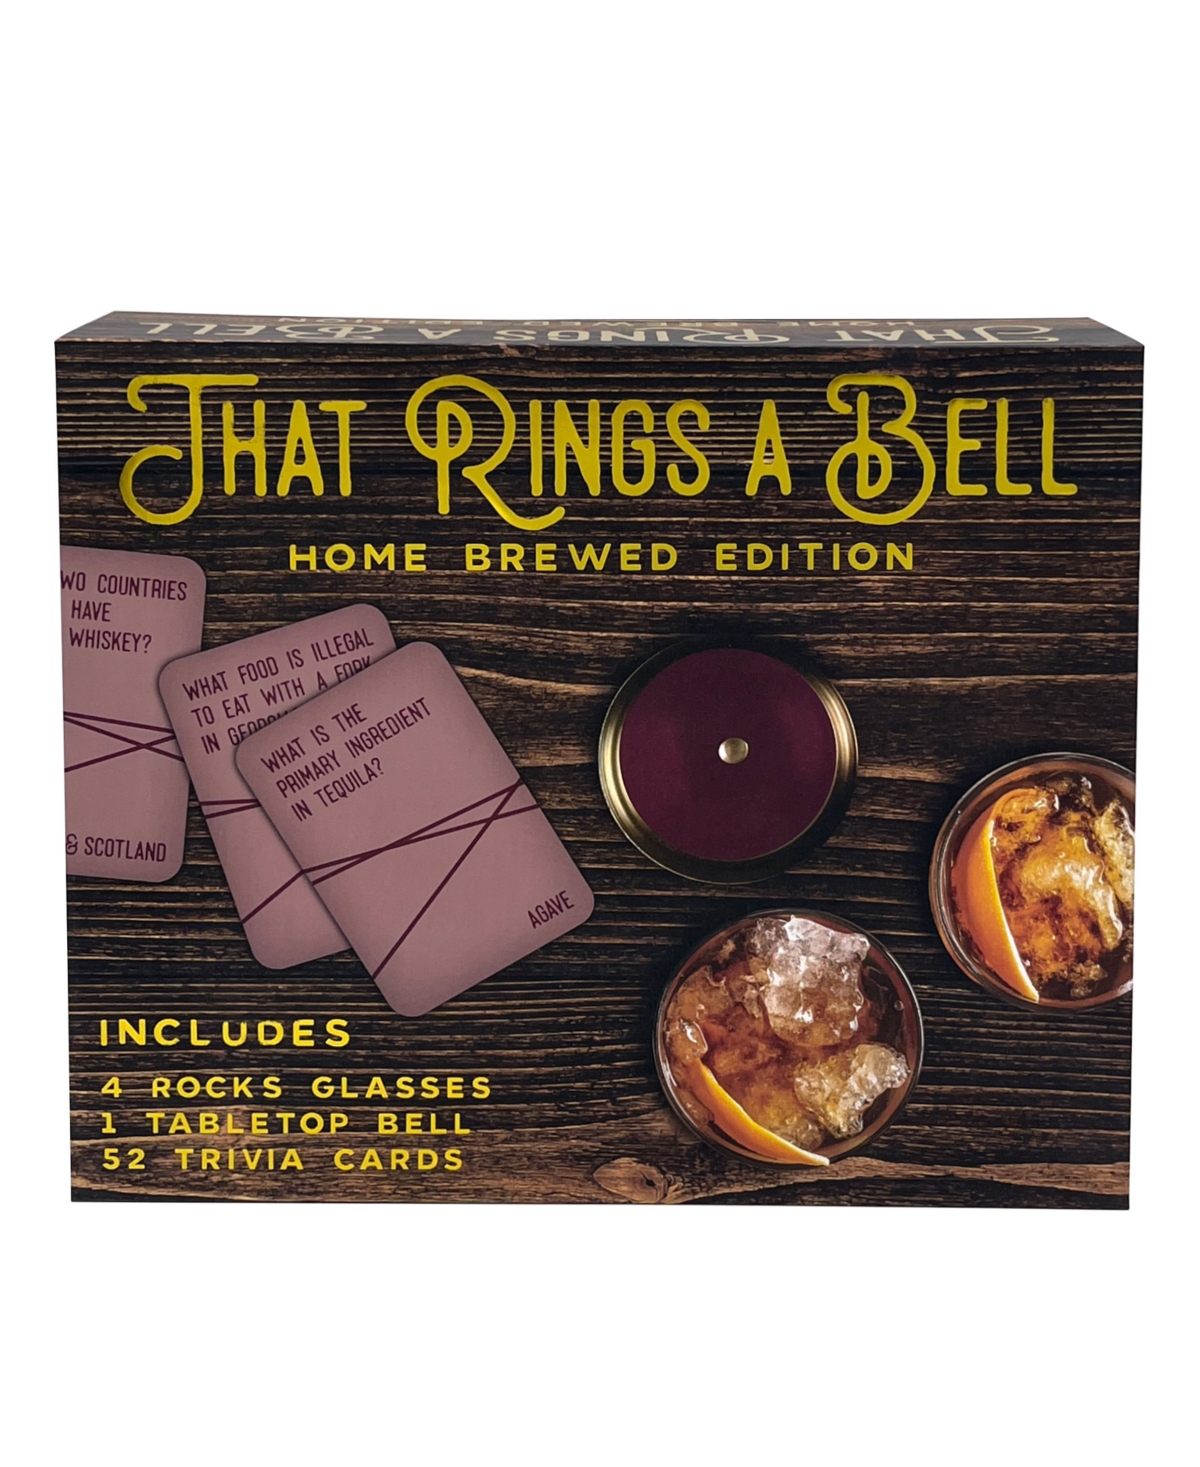 Tmd Holdings That Rings A Bell Trivia Game Boxed Game With 4 Rocks Glasses, Tabletop Bell And 52 Trivia Cards 10 In Multi